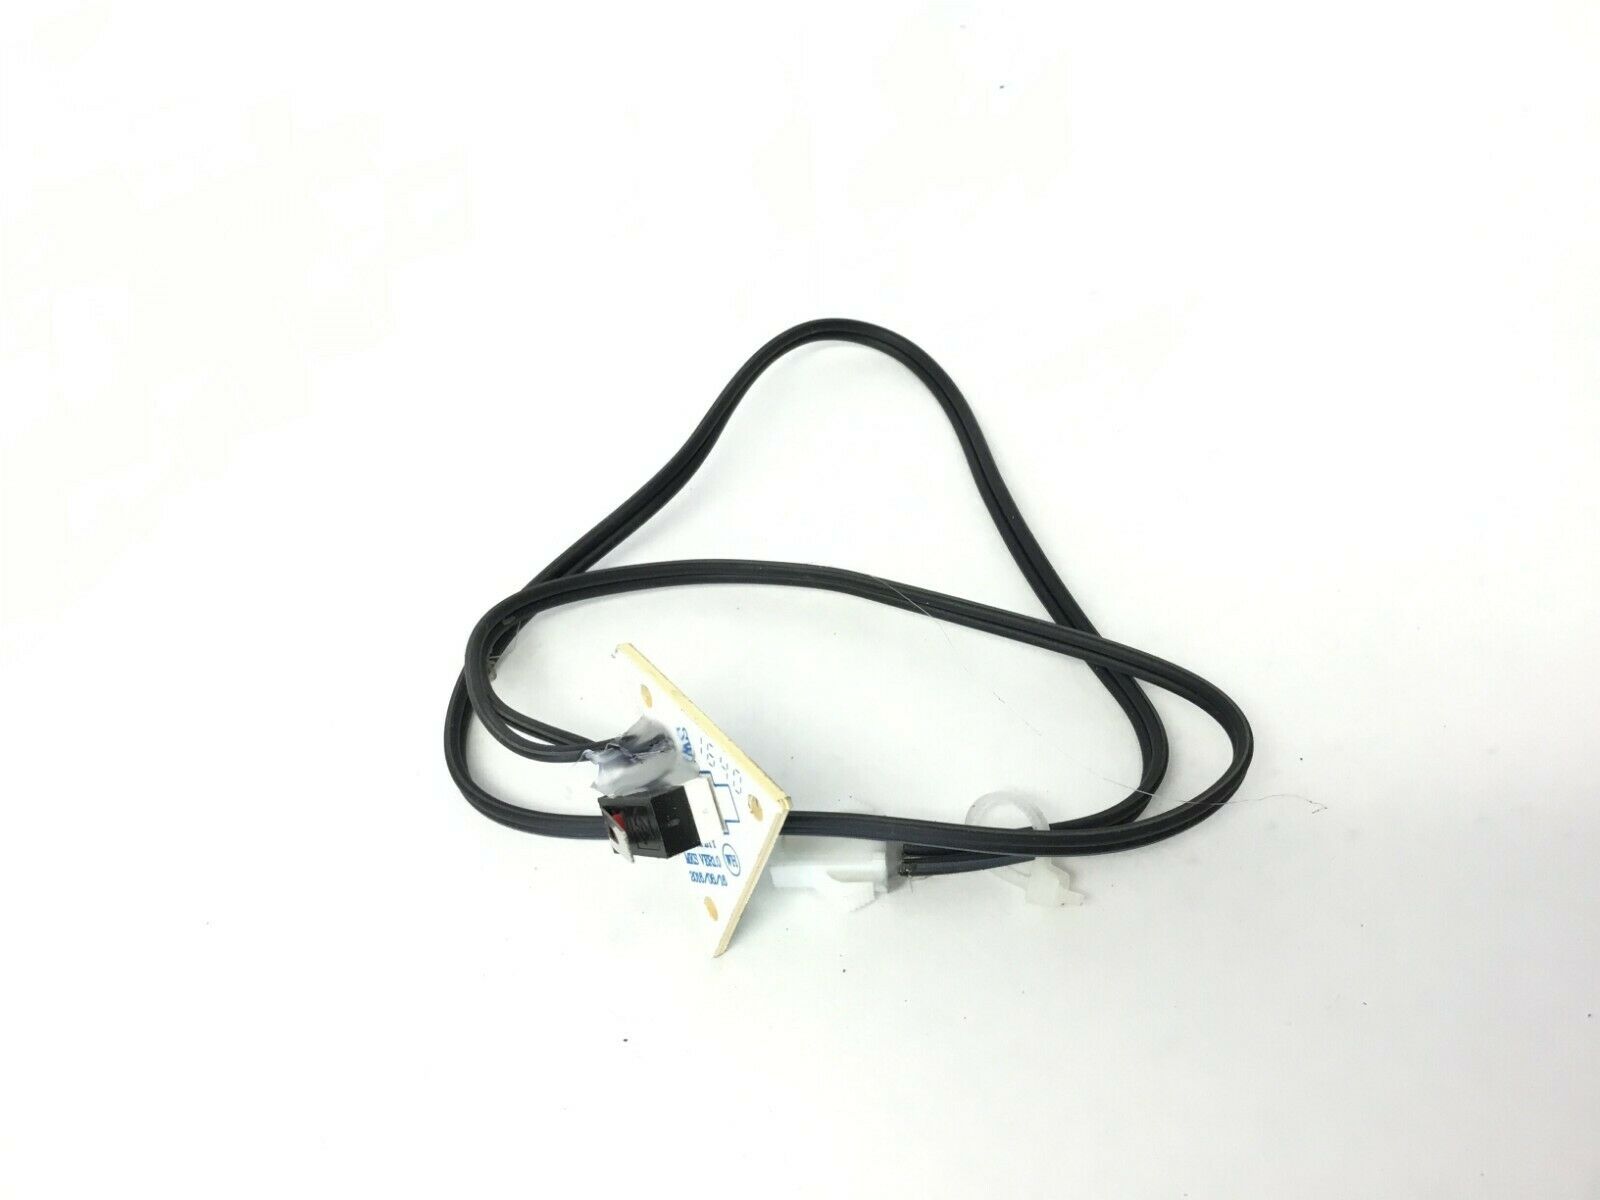 BH Fitness Treadmill Micro Switch with Wire Harness S3Ti-G04-06 (Used)